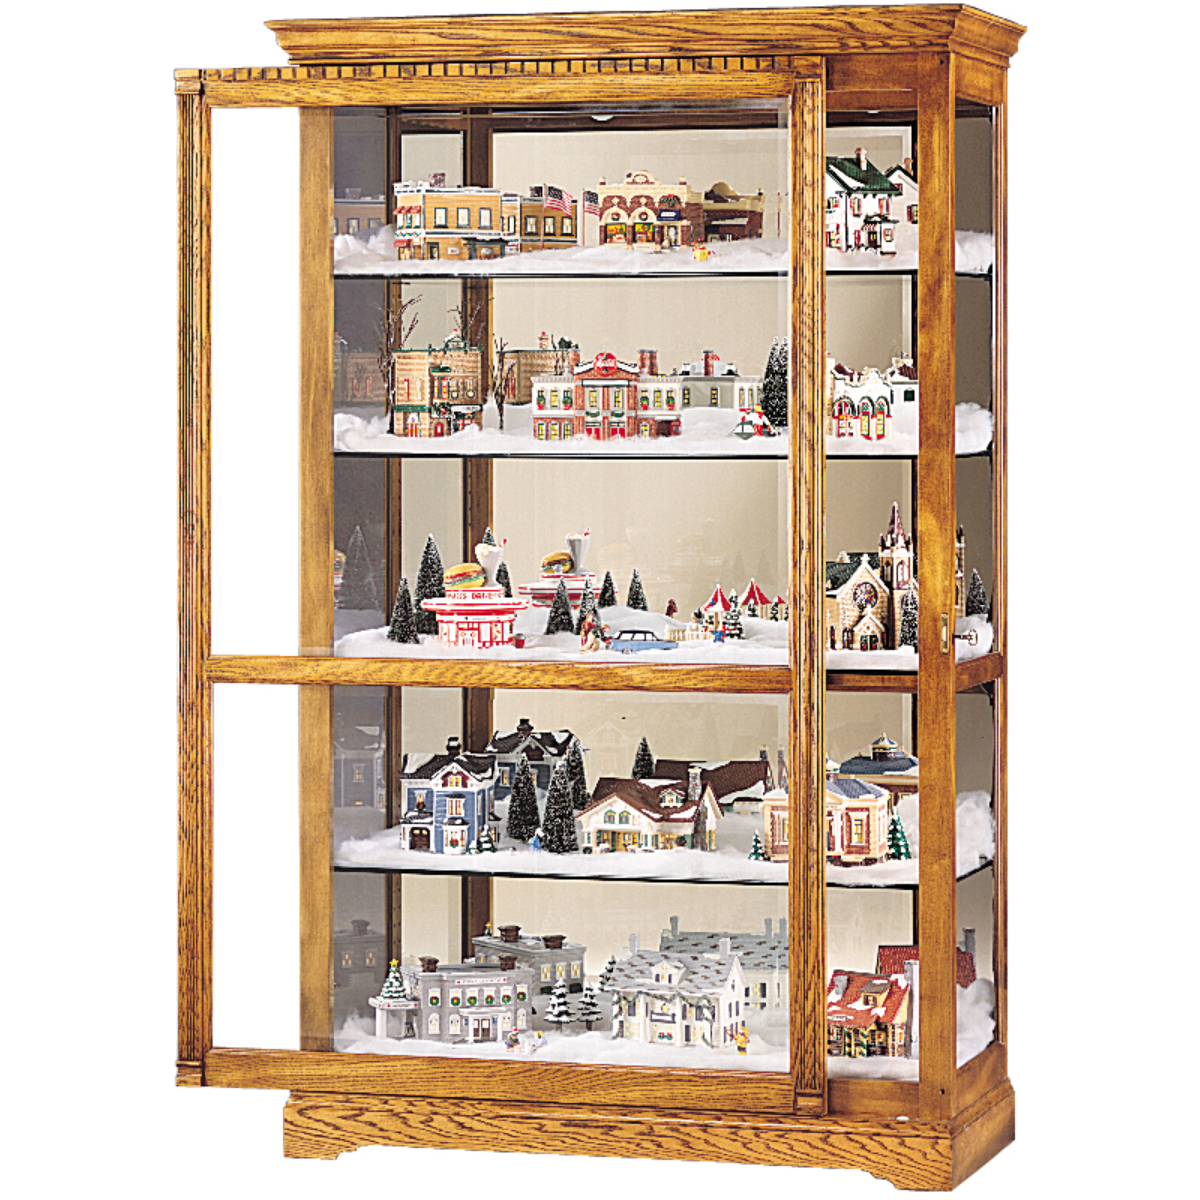 Howard Miller Parkview Curio Cabinet 680237 - Home Bars USA